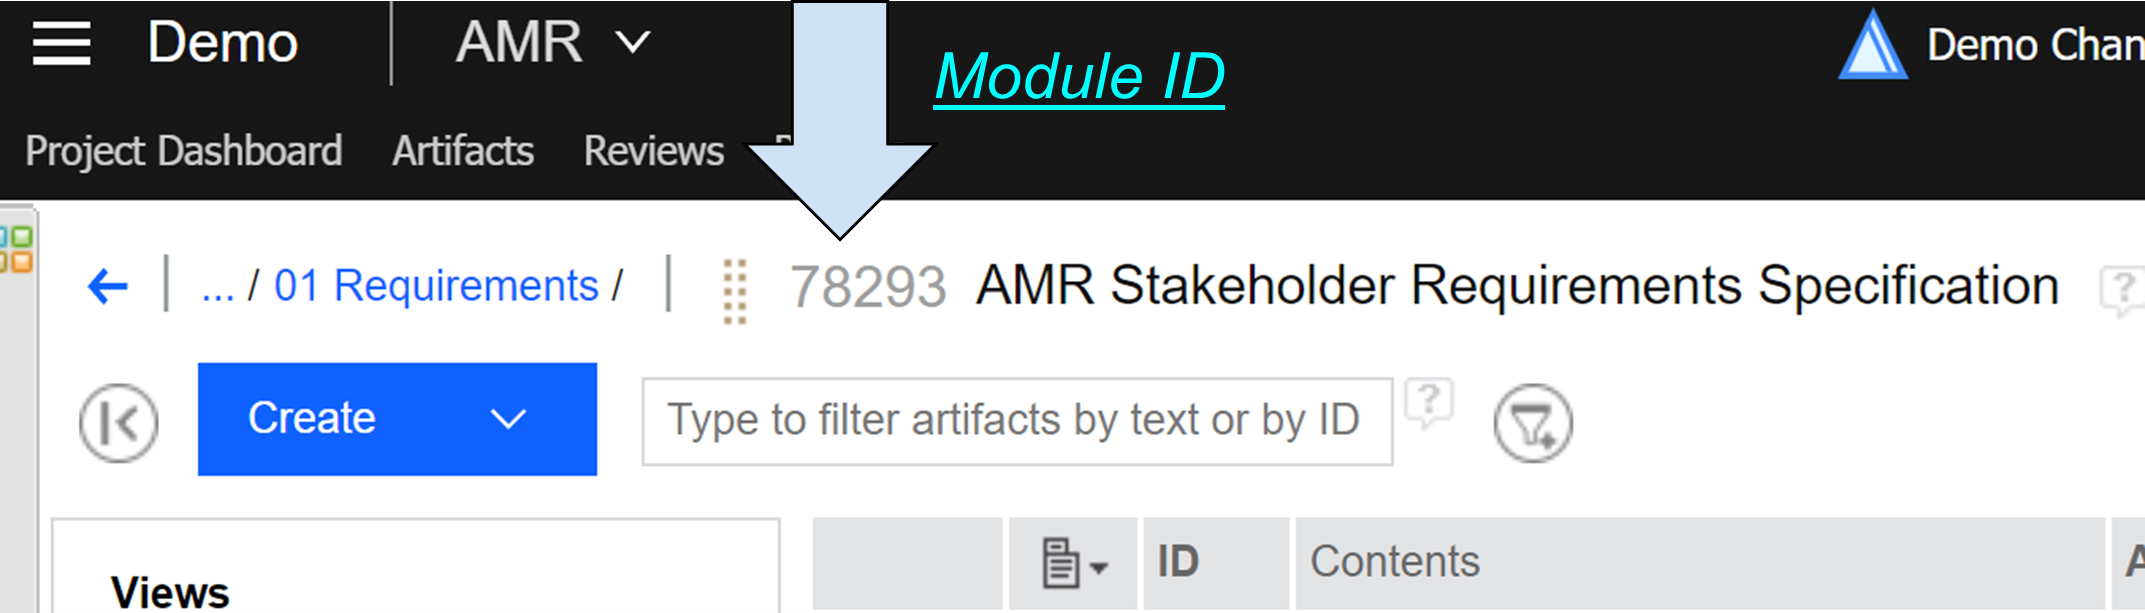 The ID of the AMR Stakeholder Requirements Specification module can be seen next to its title on the left in grey color